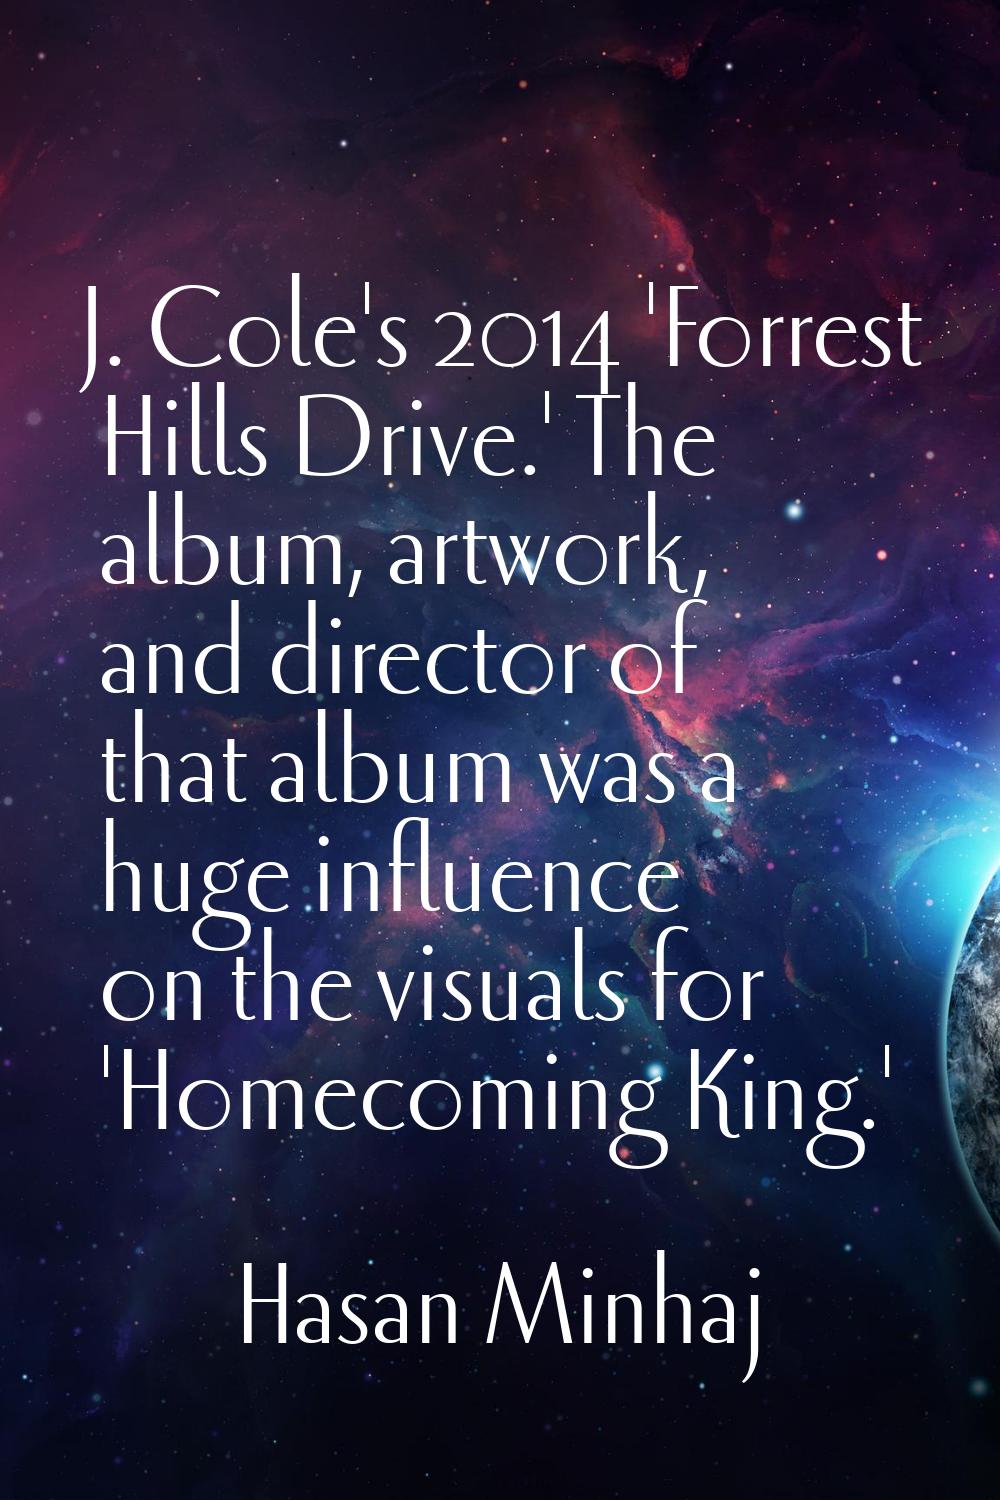 J. Cole's 2014 'Forrest Hills Drive.' The album, artwork, and director of that album was a huge inf